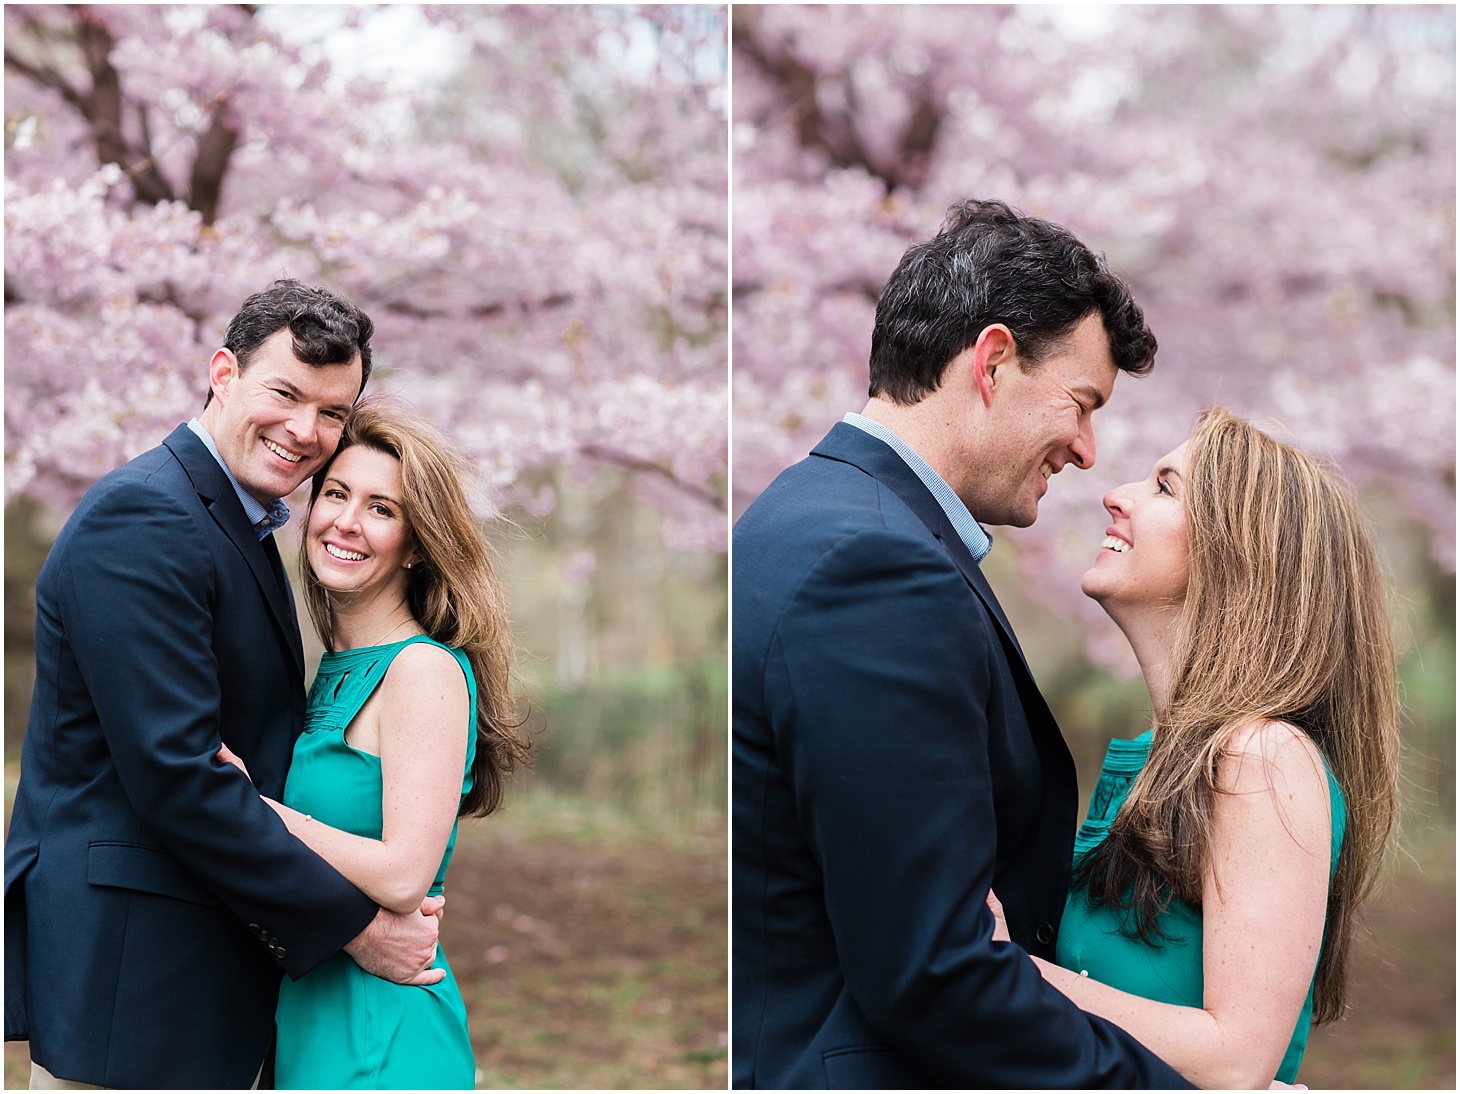 Engagement Portraits at Bethesda Terrace in Central Park | Springtime Engagement Session in New York City | Sarah Bradshaw Photography